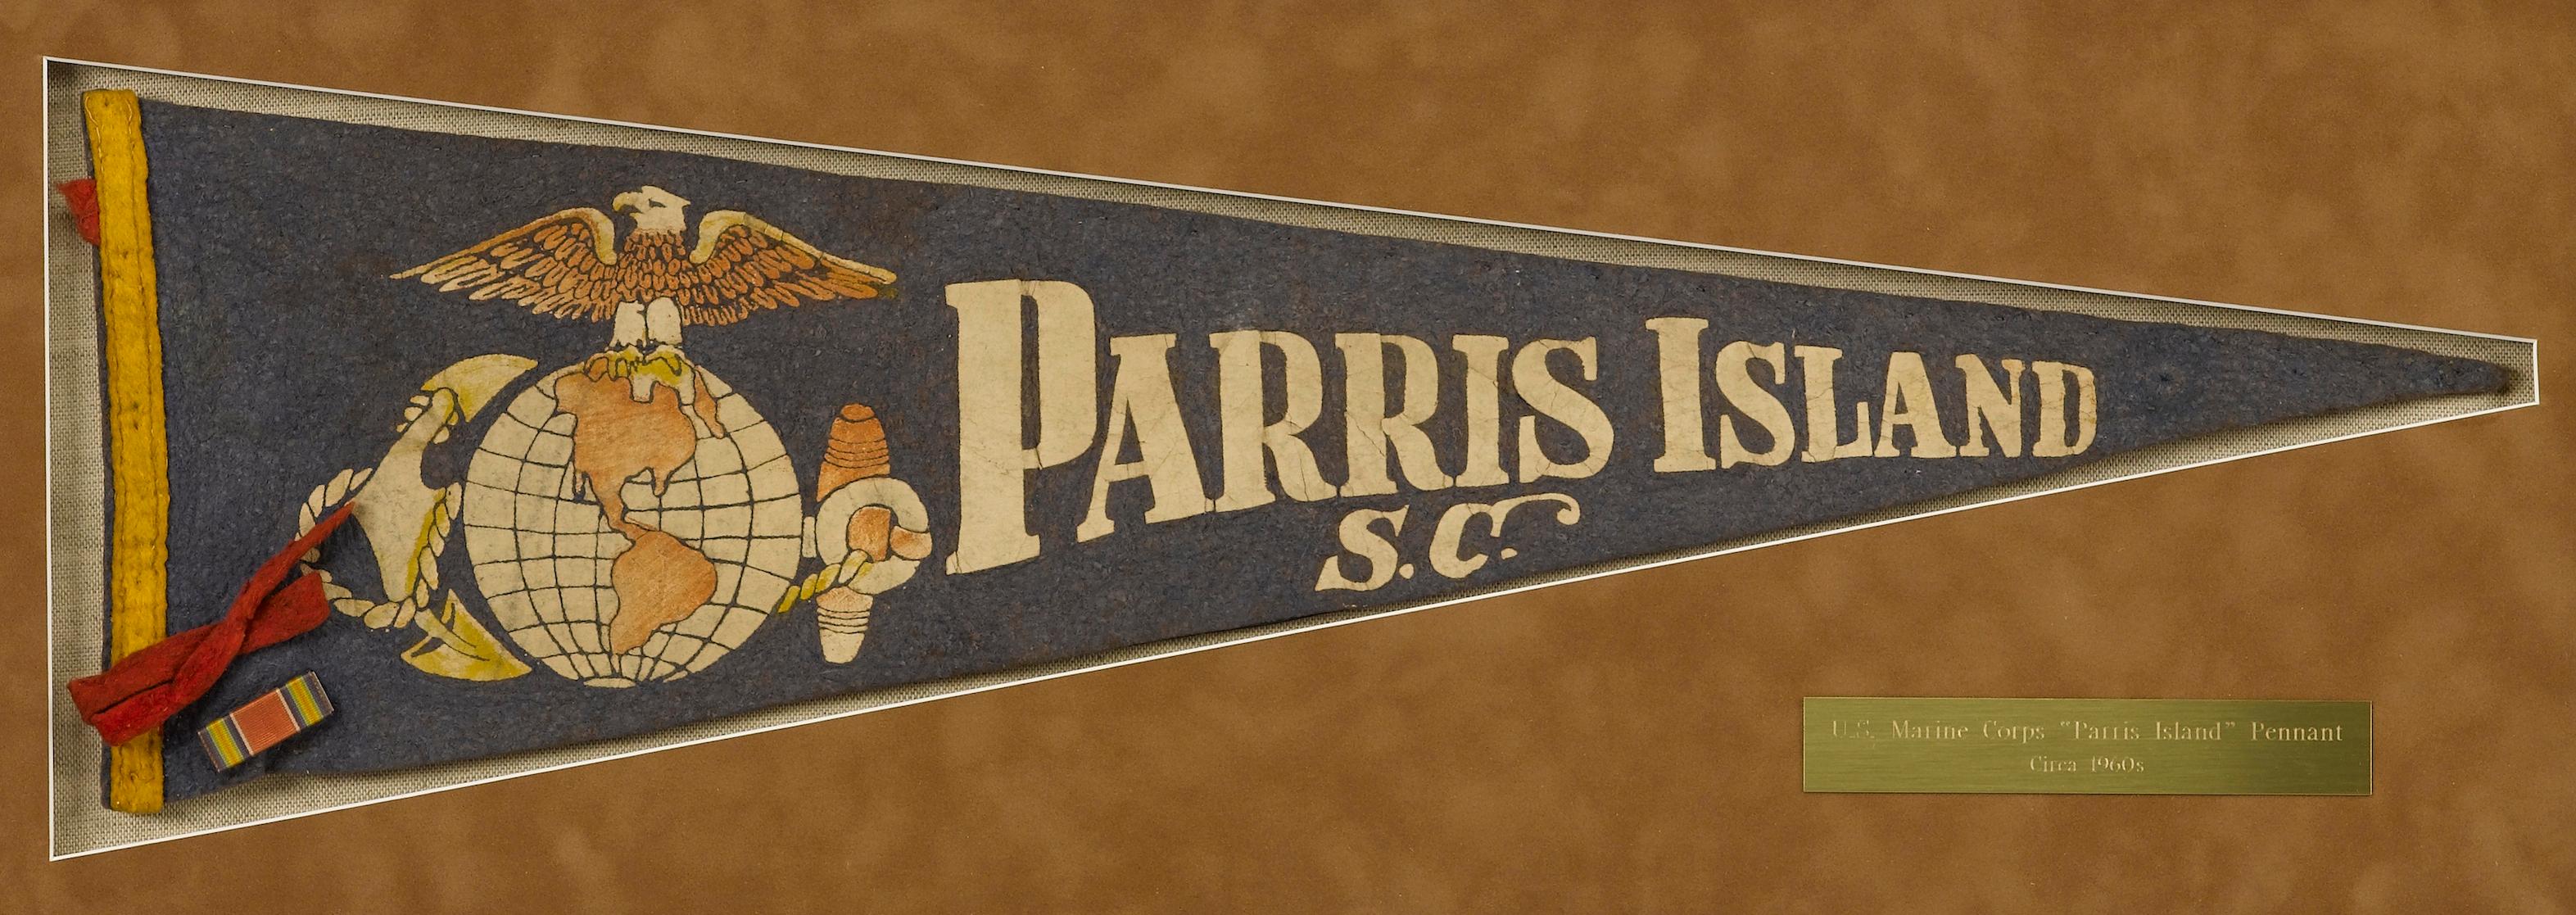 This is an original, vintage Parris Island, South Carolina pennant. The pennant is blue, with white script which reads 